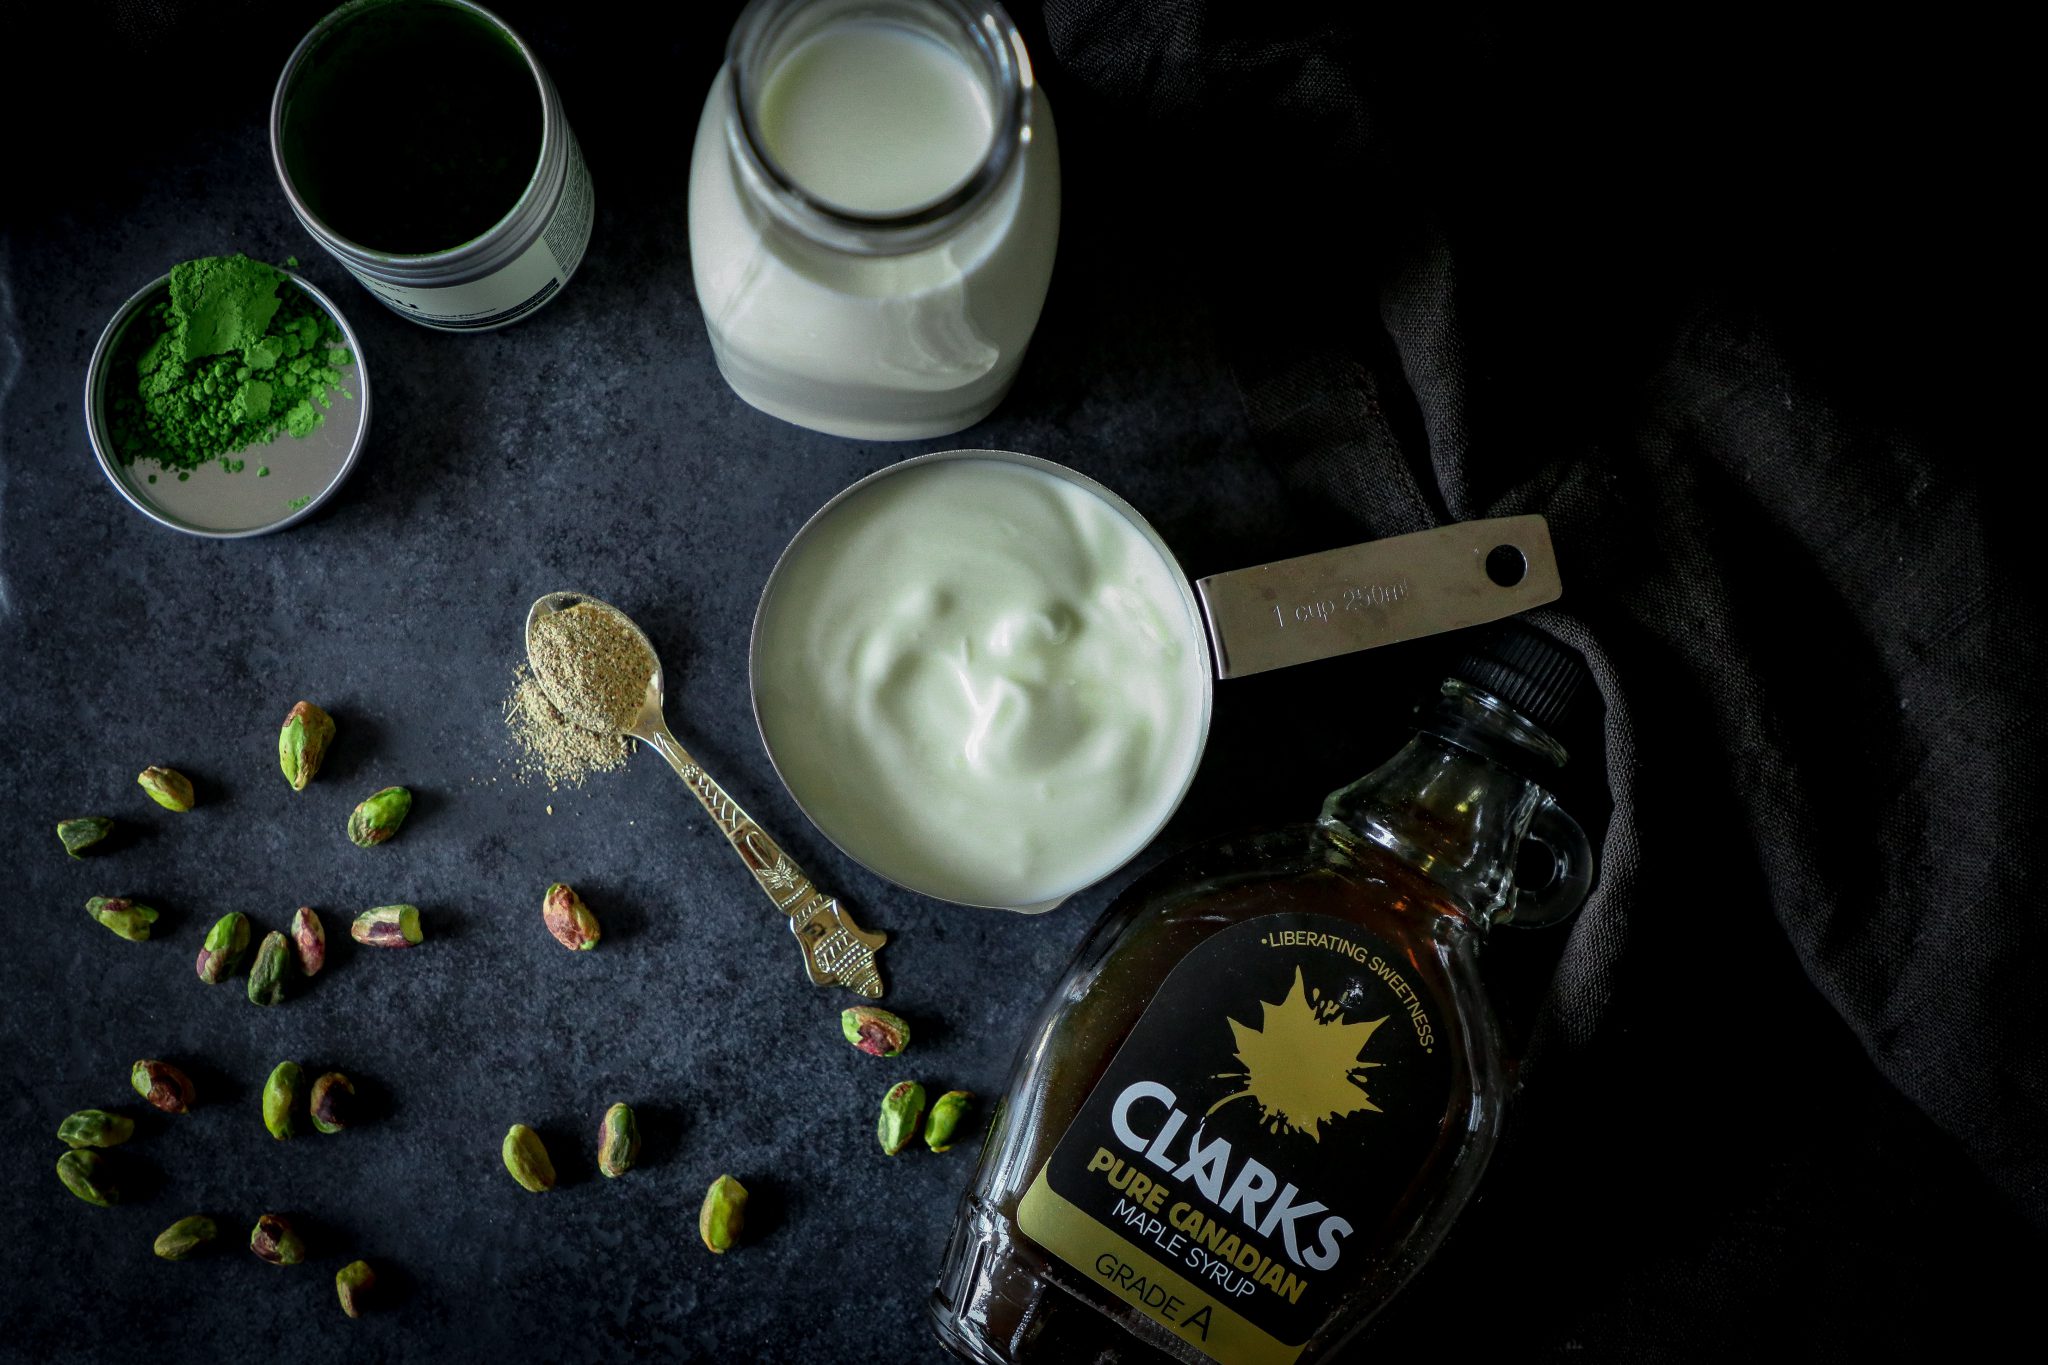 Summers are knocking- try this refreshing and healthy mix of yoghurt, milk, pistachios and matcha.